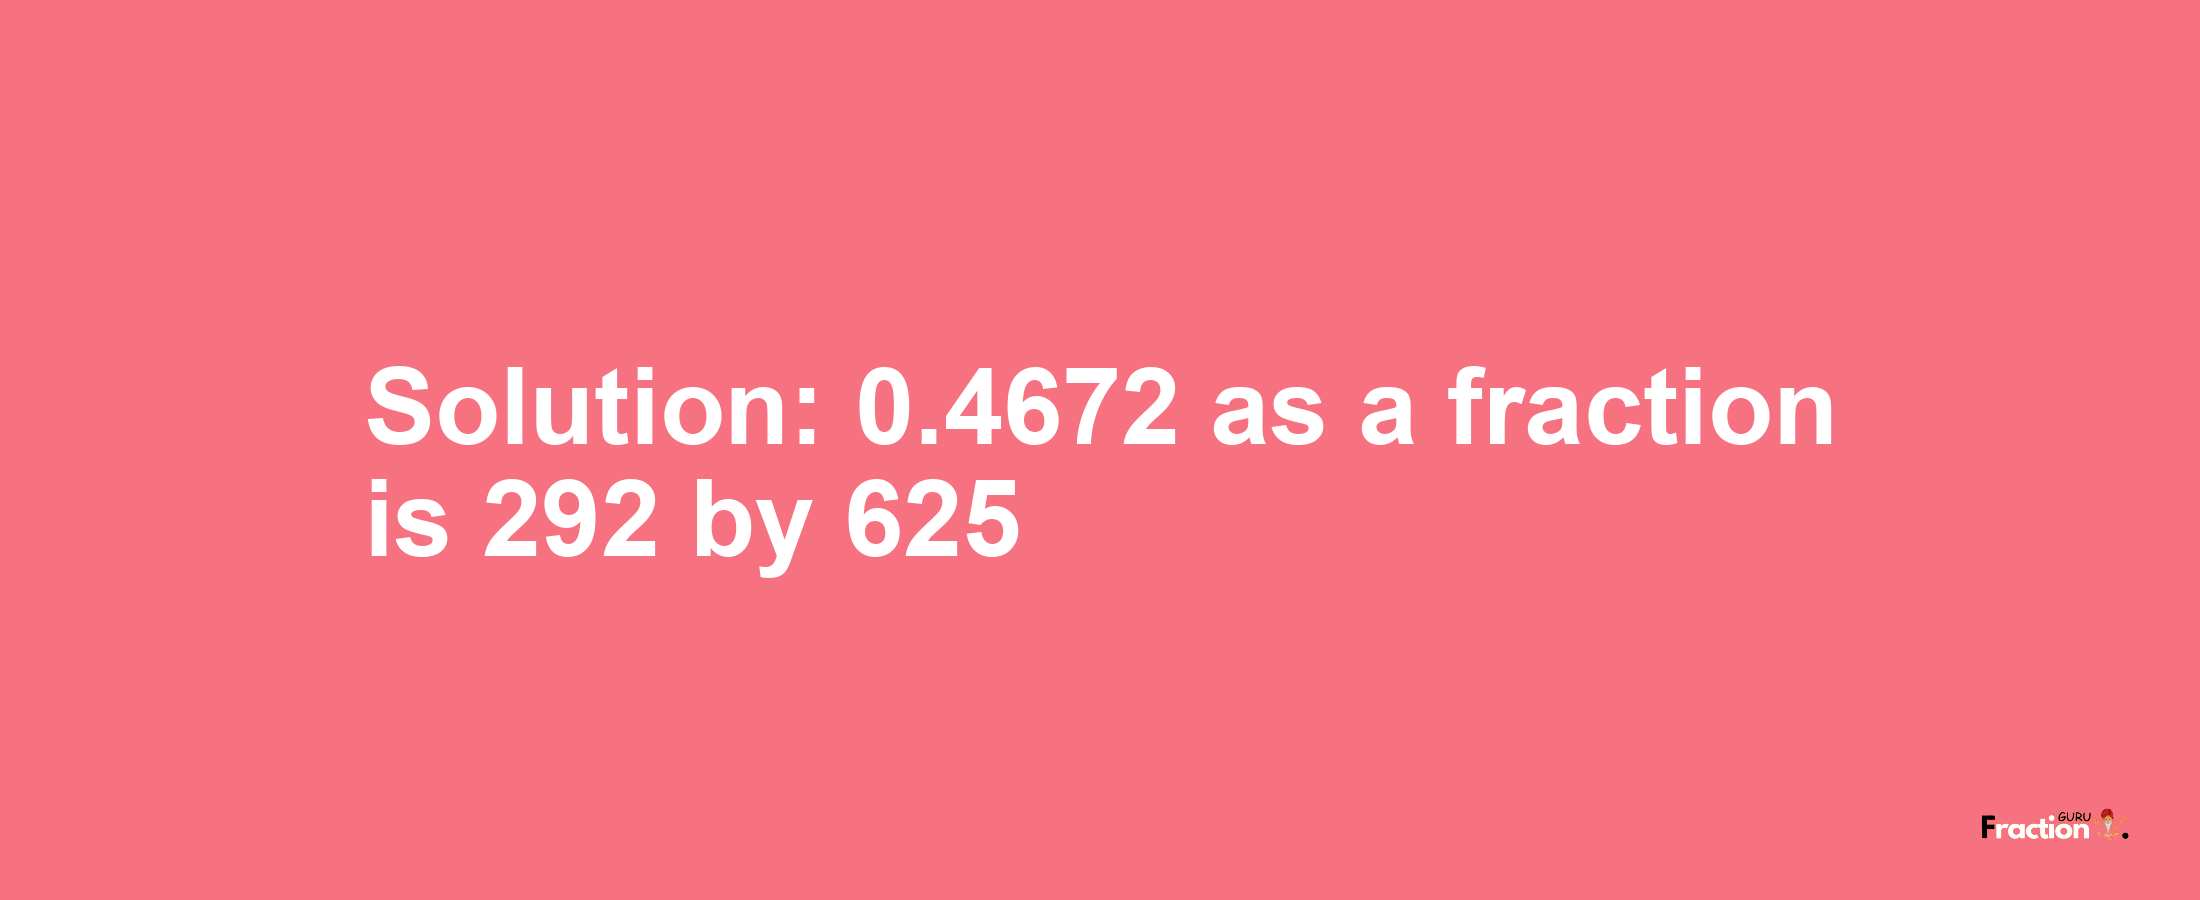 Solution:0.4672 as a fraction is 292/625